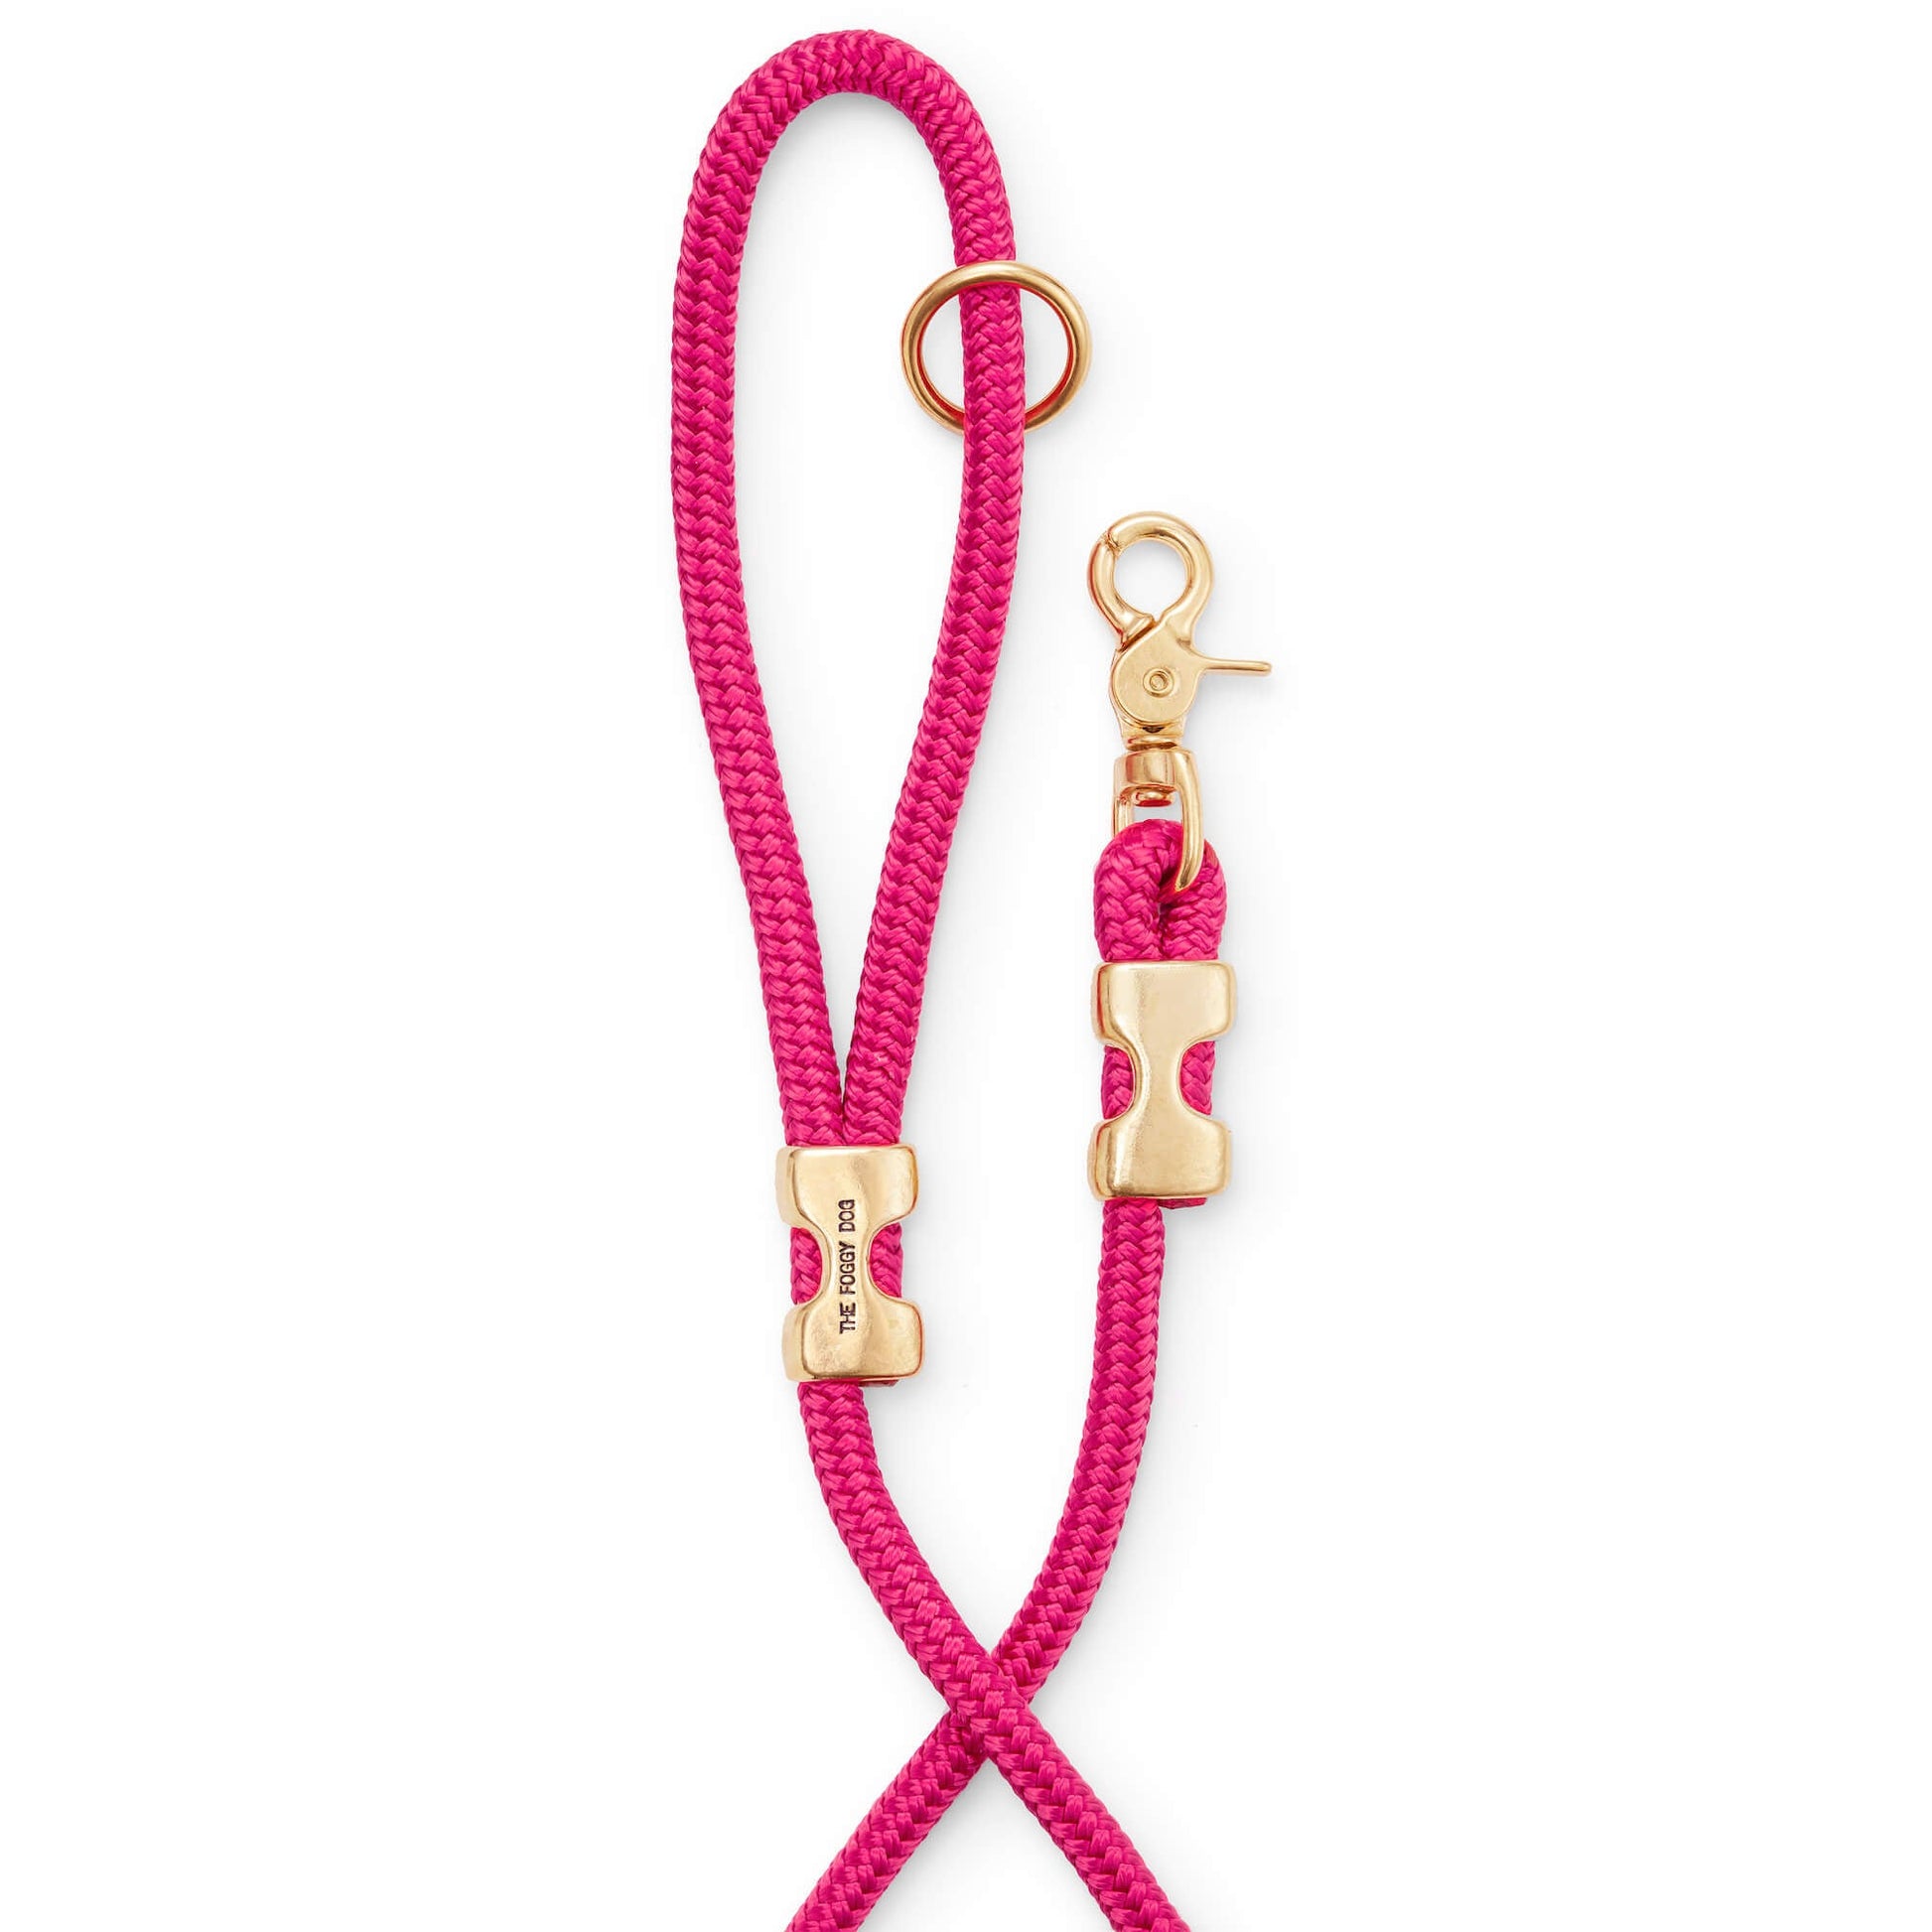 Hot Pink Marine Rope Dog Leash (Standard/Petite) from The Foggy Dog 